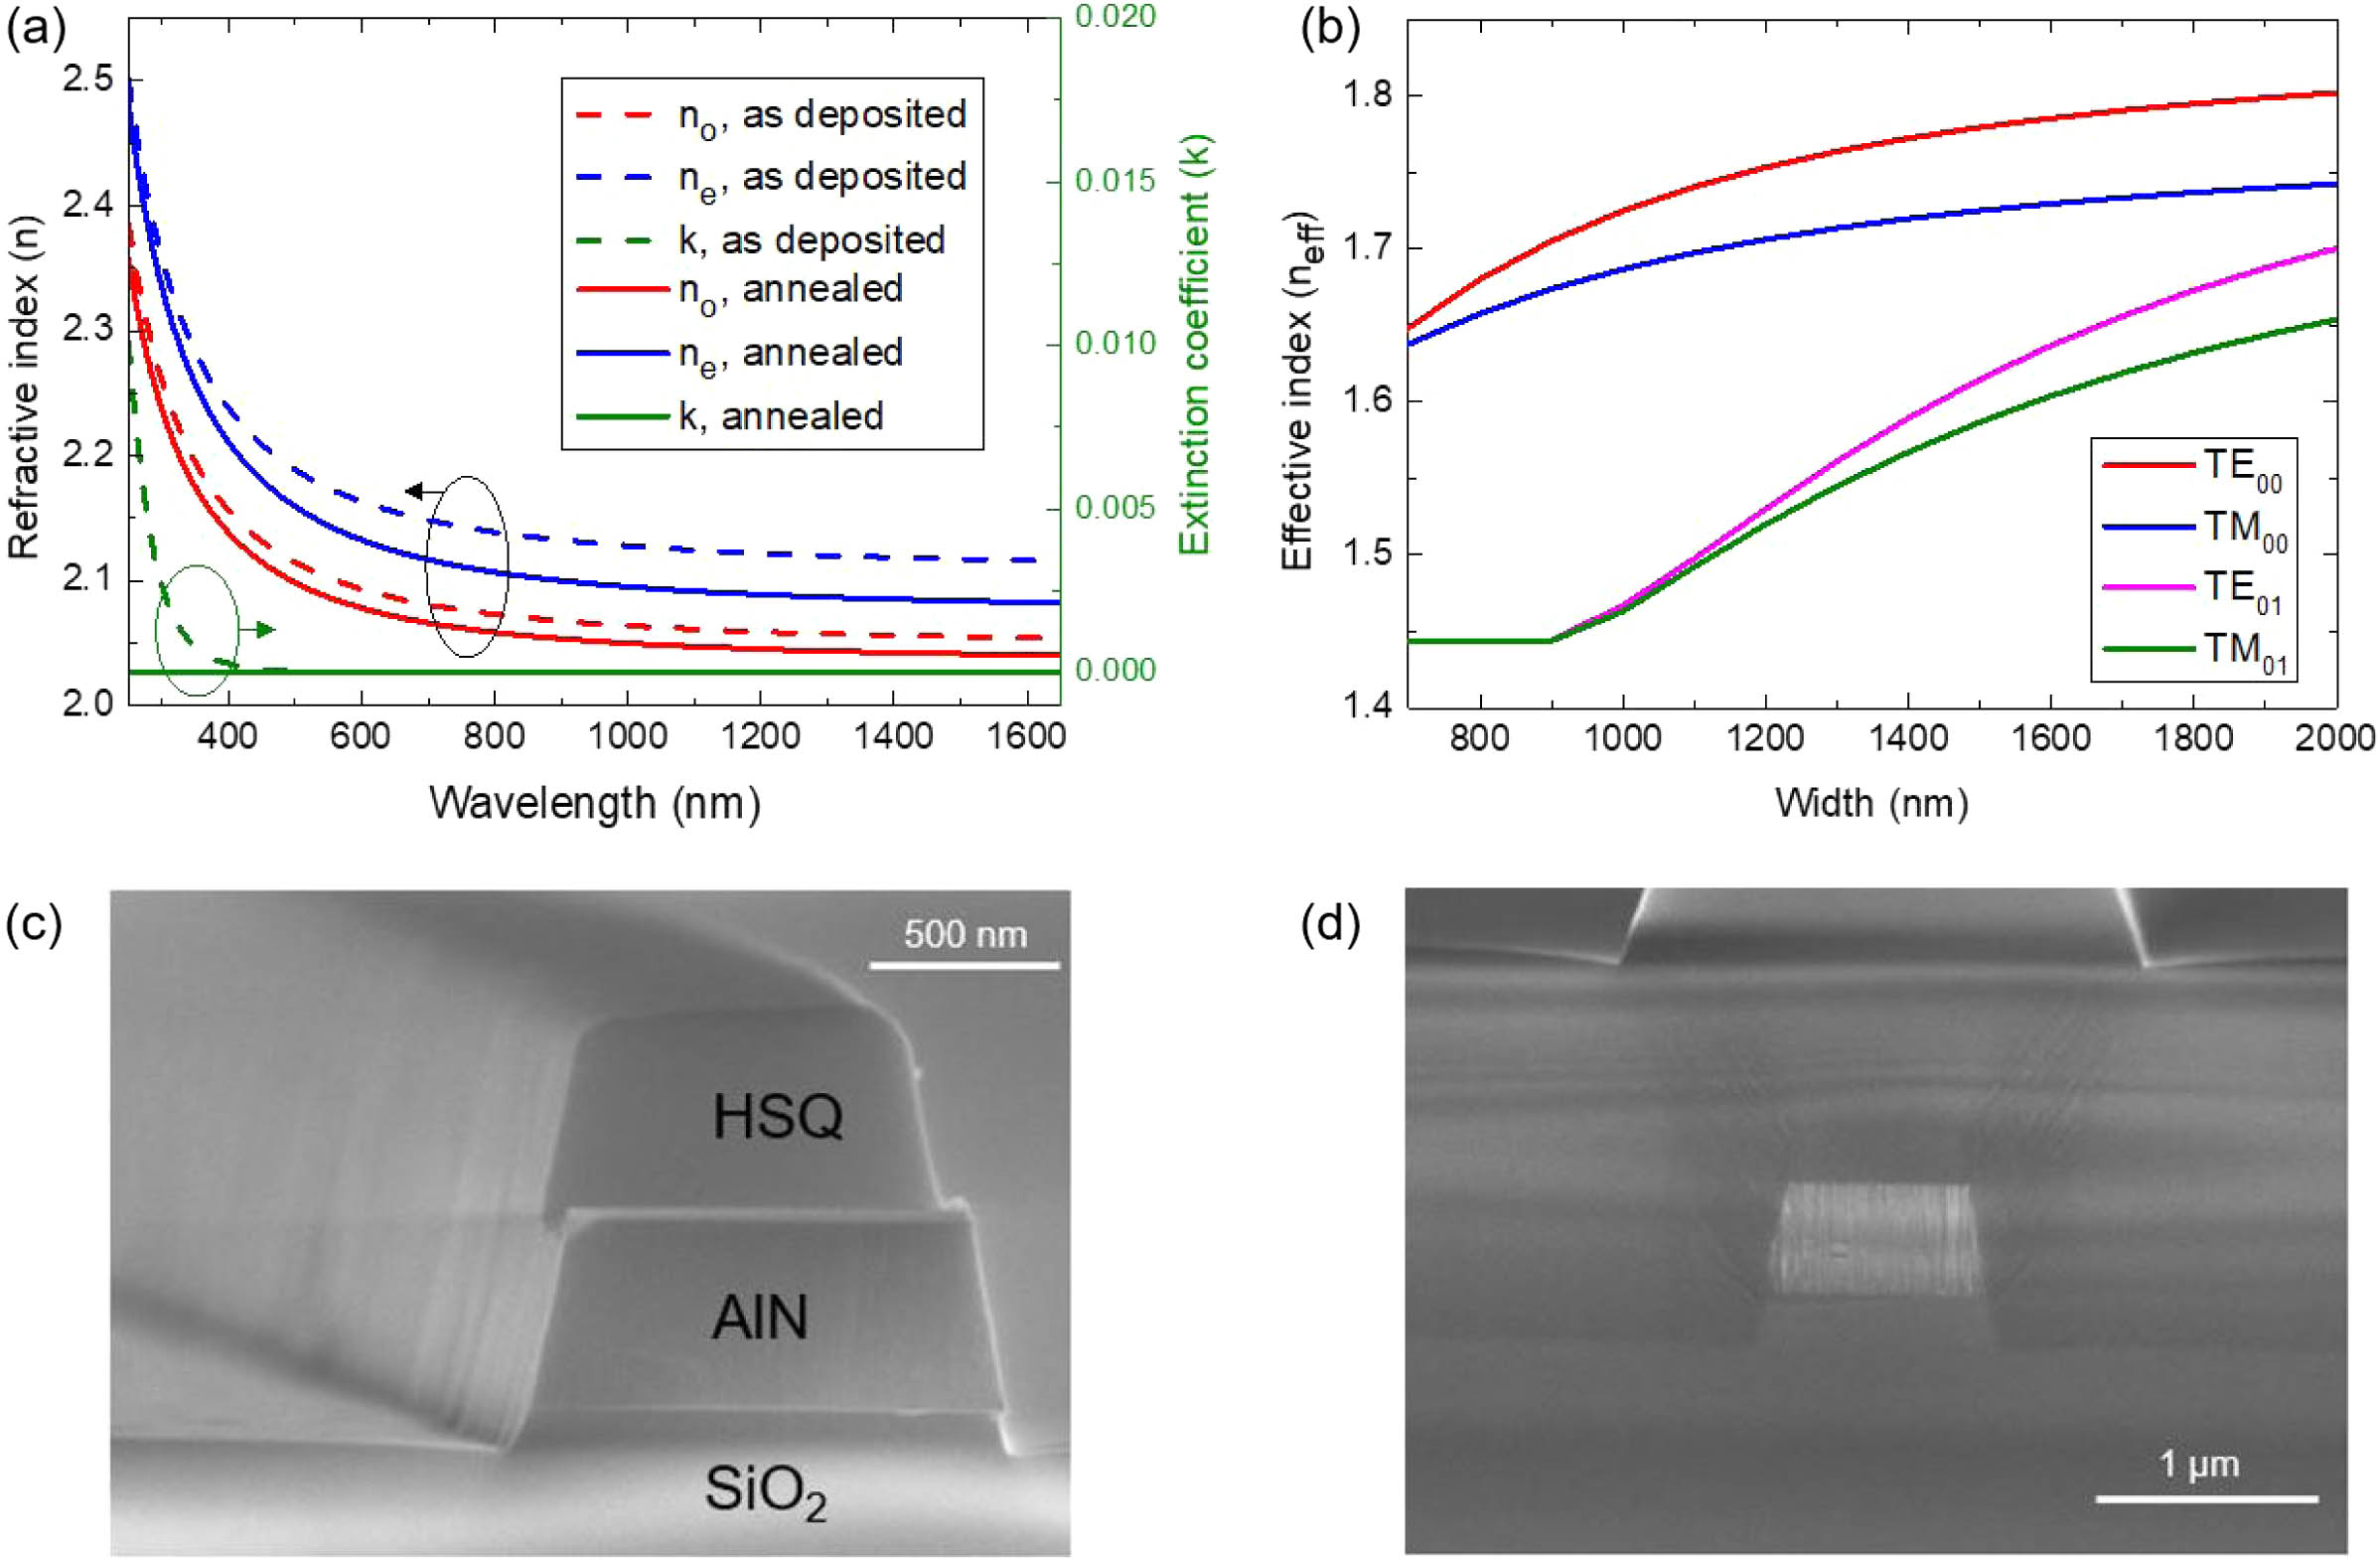 (a) Measured complex refractive indices of AlN. (b) Calculated effective indices dependent on the waveguide width. Scanning electron microscope (SEM) images of the AlN waveguide (c) without top cladding and (d) with SiO2 top cladding.